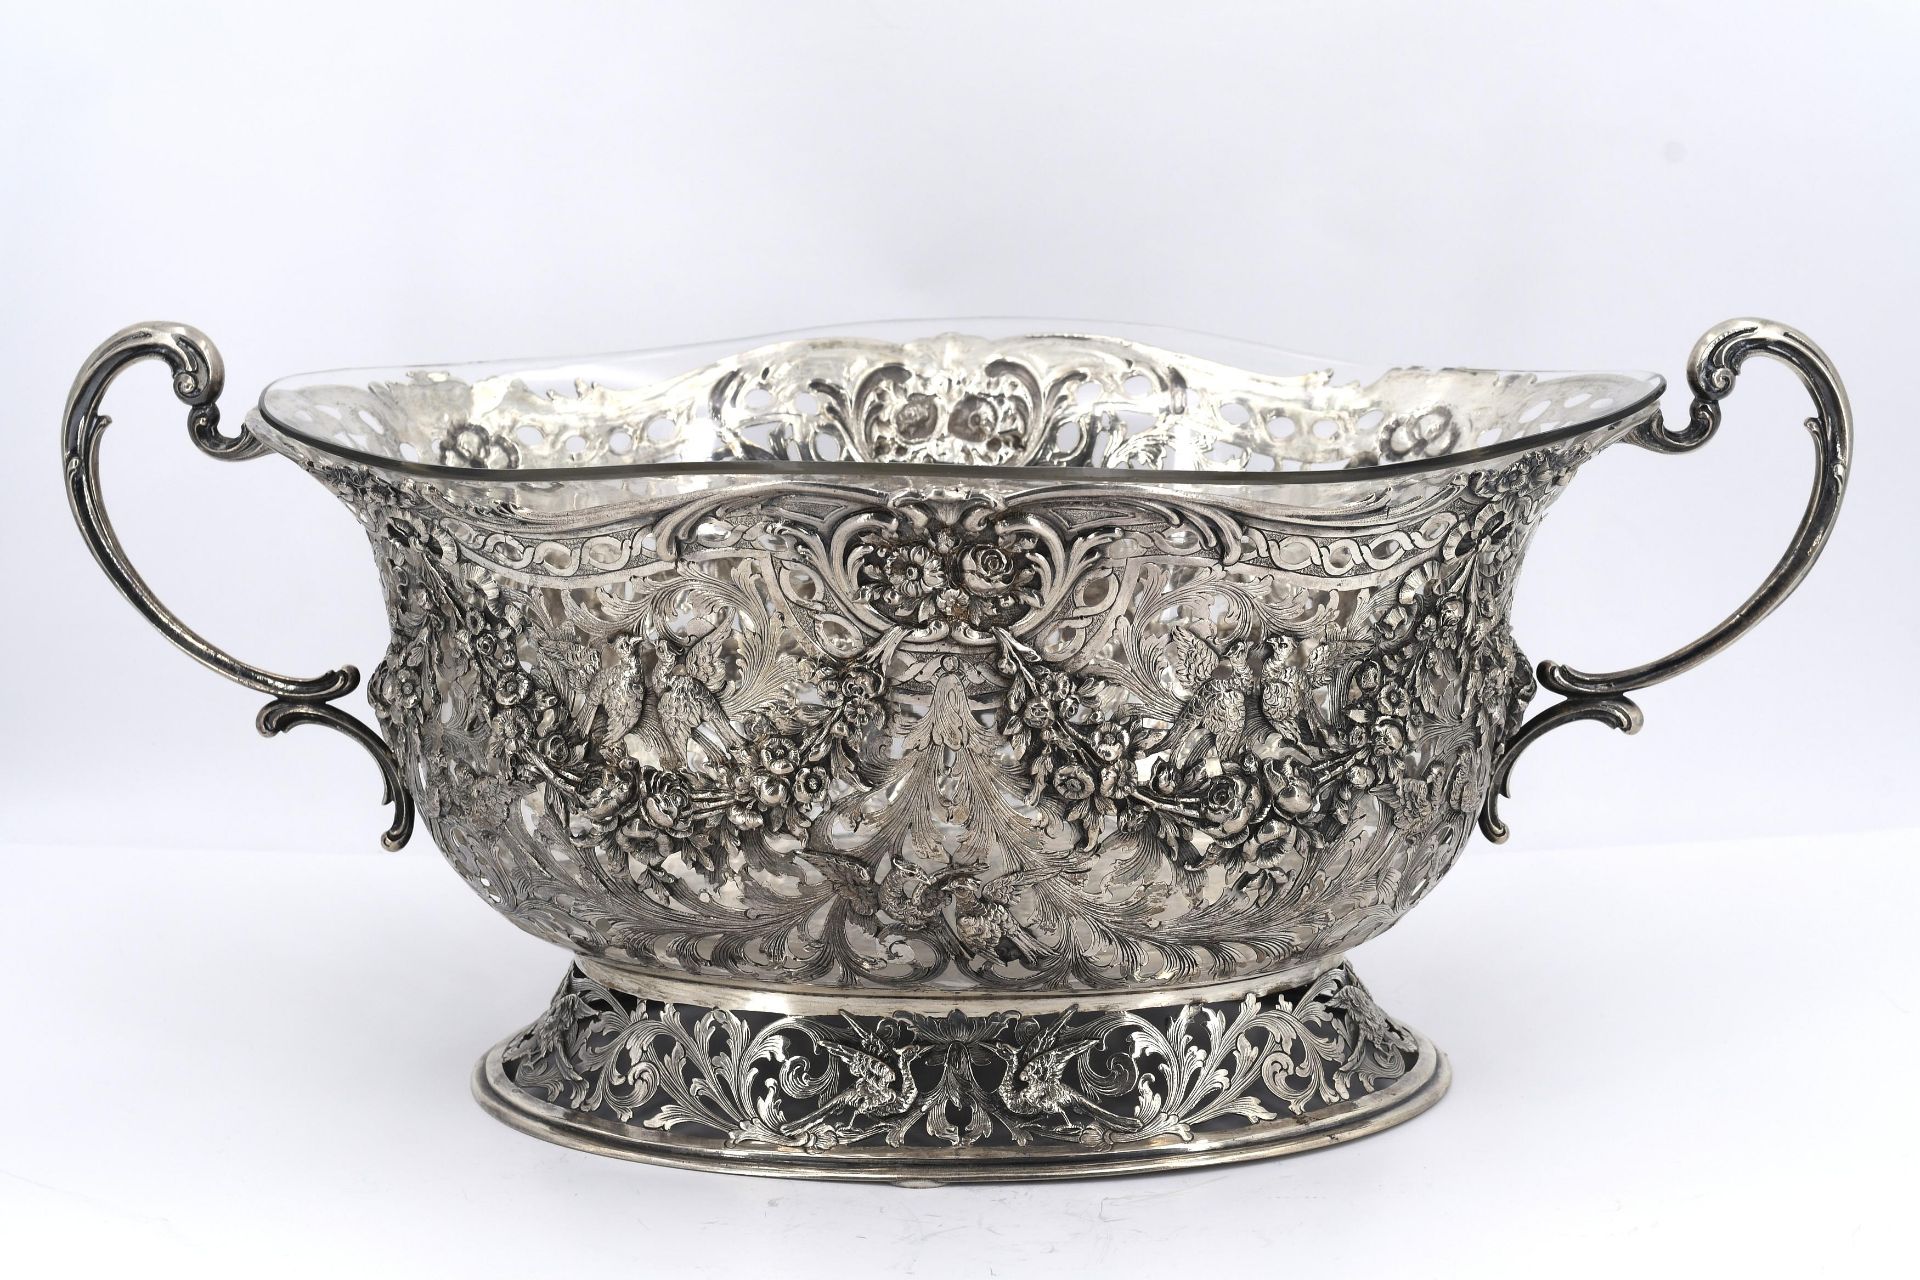 Pair of magnificent large silver bowls with garlands and birds of paradise - Image 3 of 21